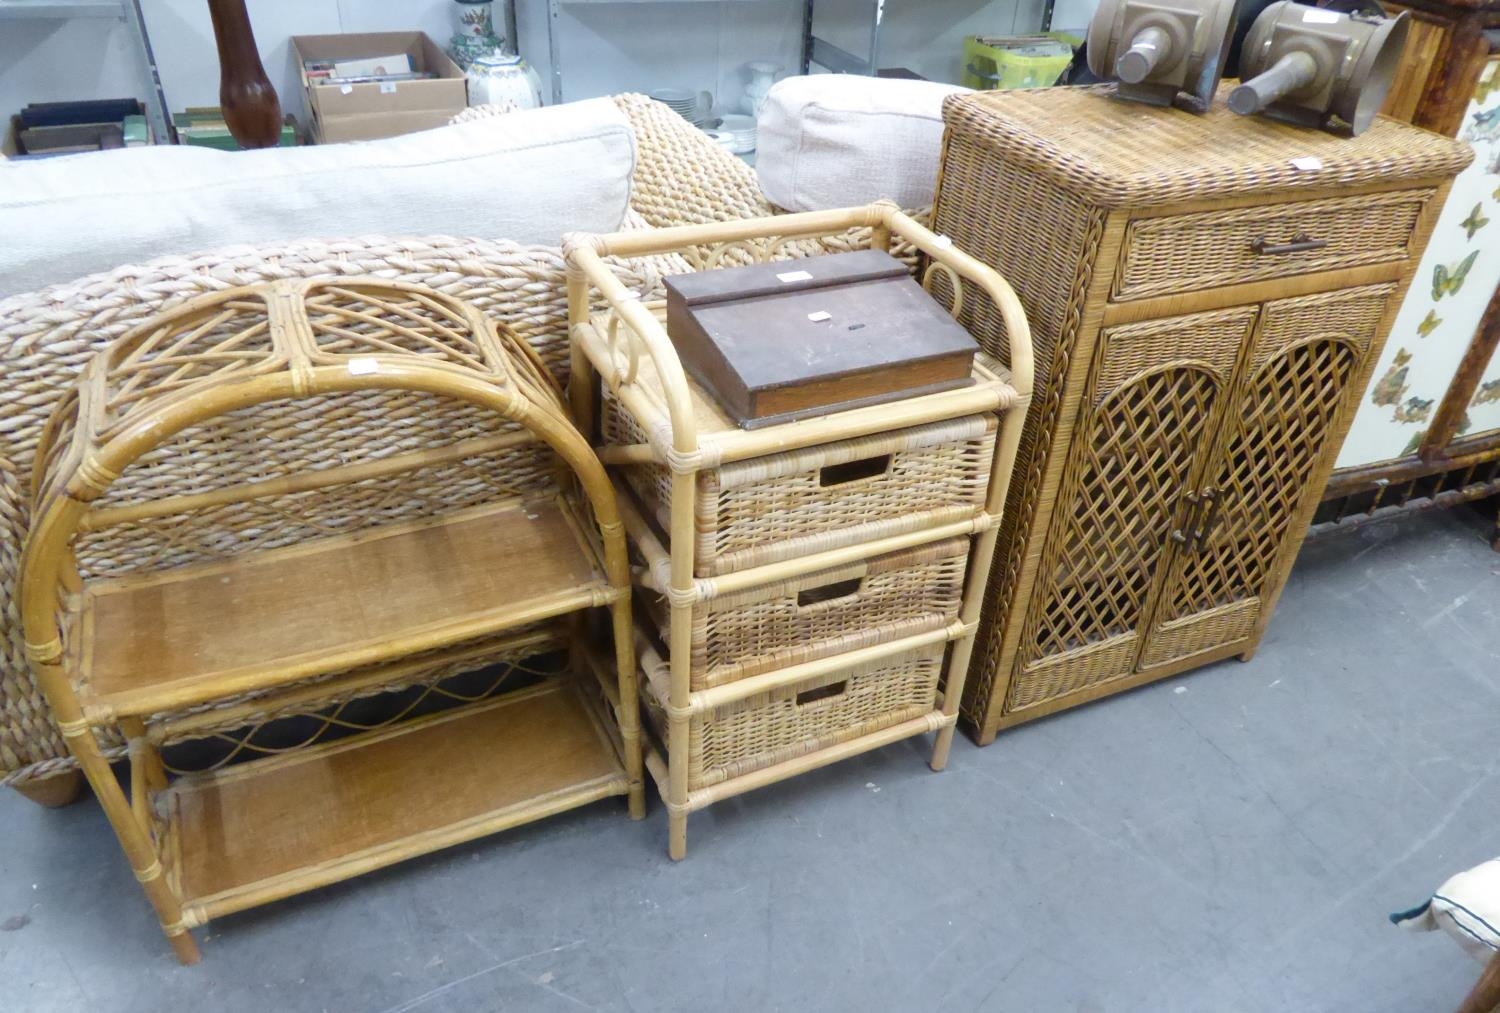 THREE SMALL PIECES OF MODERN WICKER/ WOVEN CANE FURNITURE, SIDE CABINET, THREE DRAWER CHEST and a